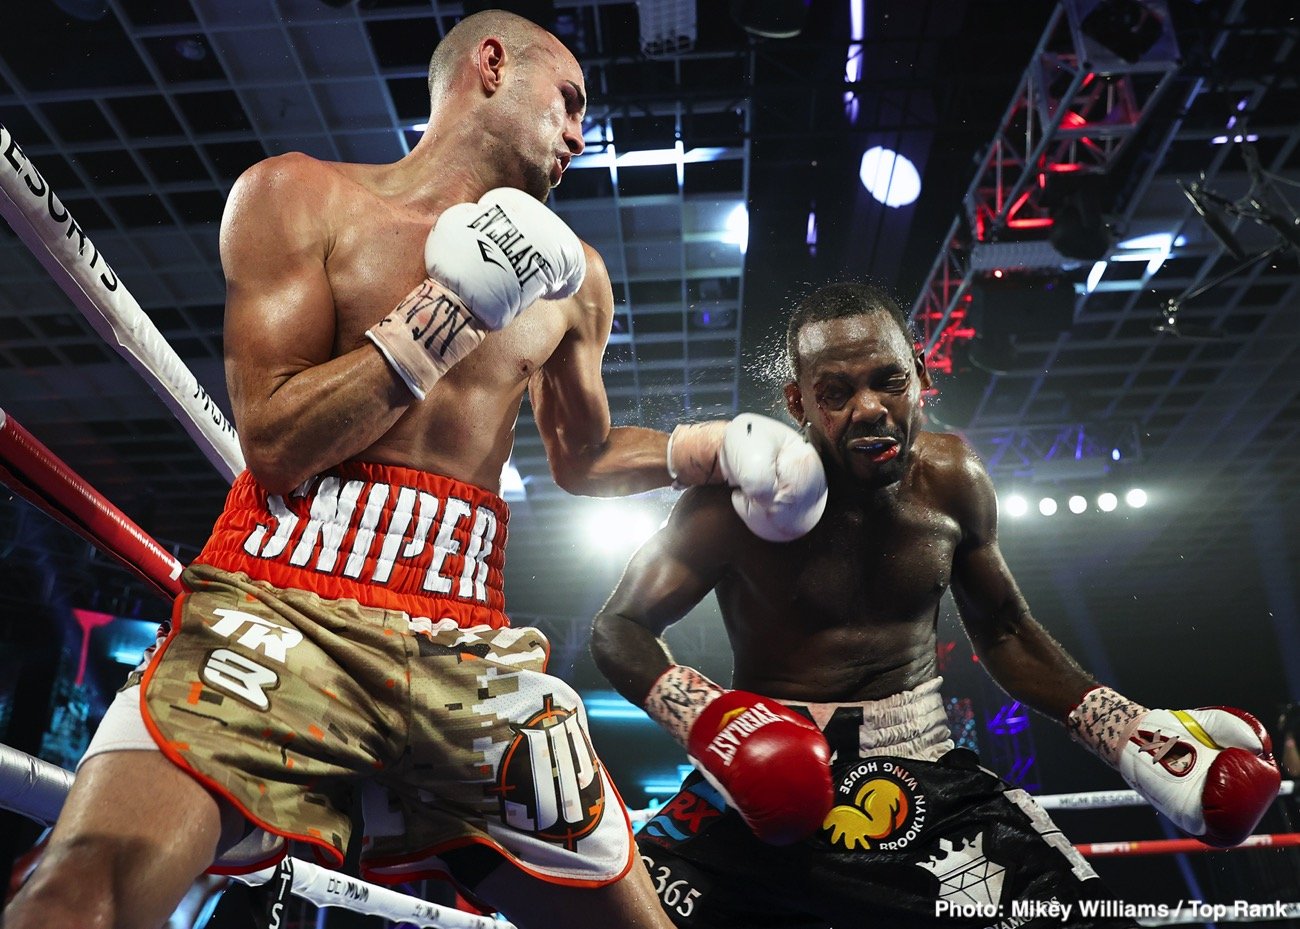 Image: Boxing Results: Robeisy Ramirez defeats Gonzales & Pedraza decisions LesPierre